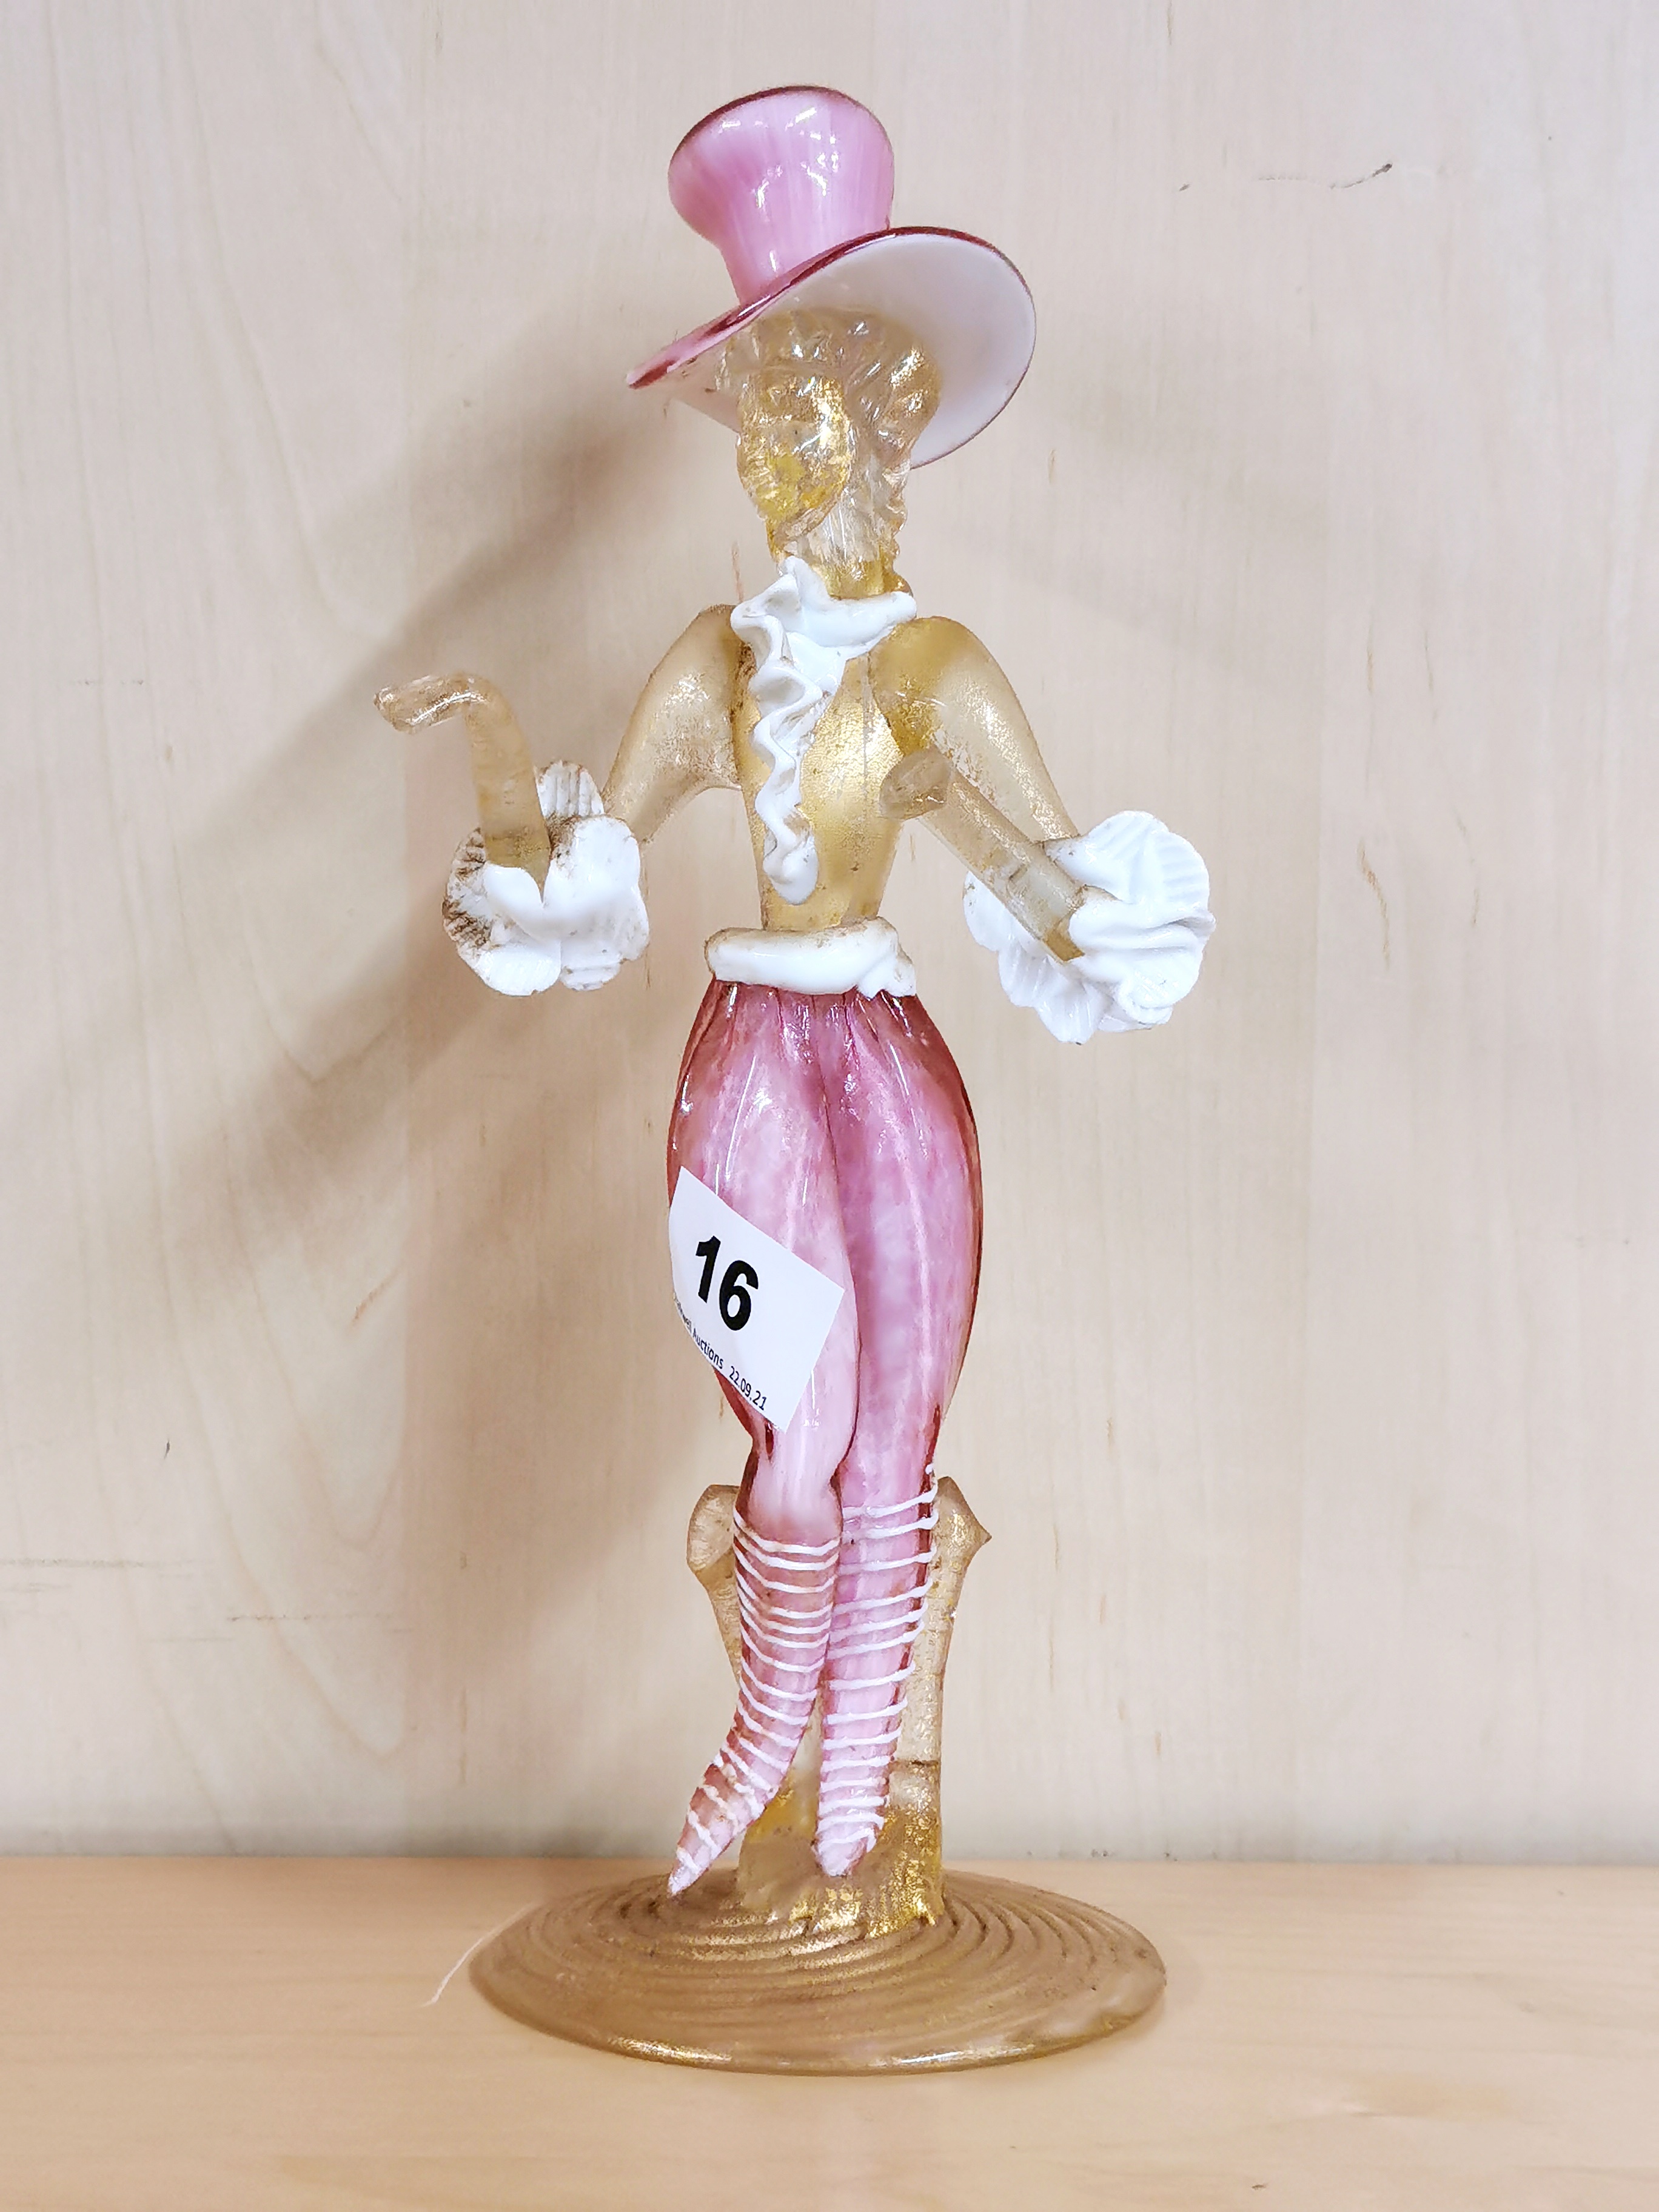 A lovely early Murano glass figure of a dancer, H. 26cm. Condition: no visible damage or repair. - Image 3 of 3